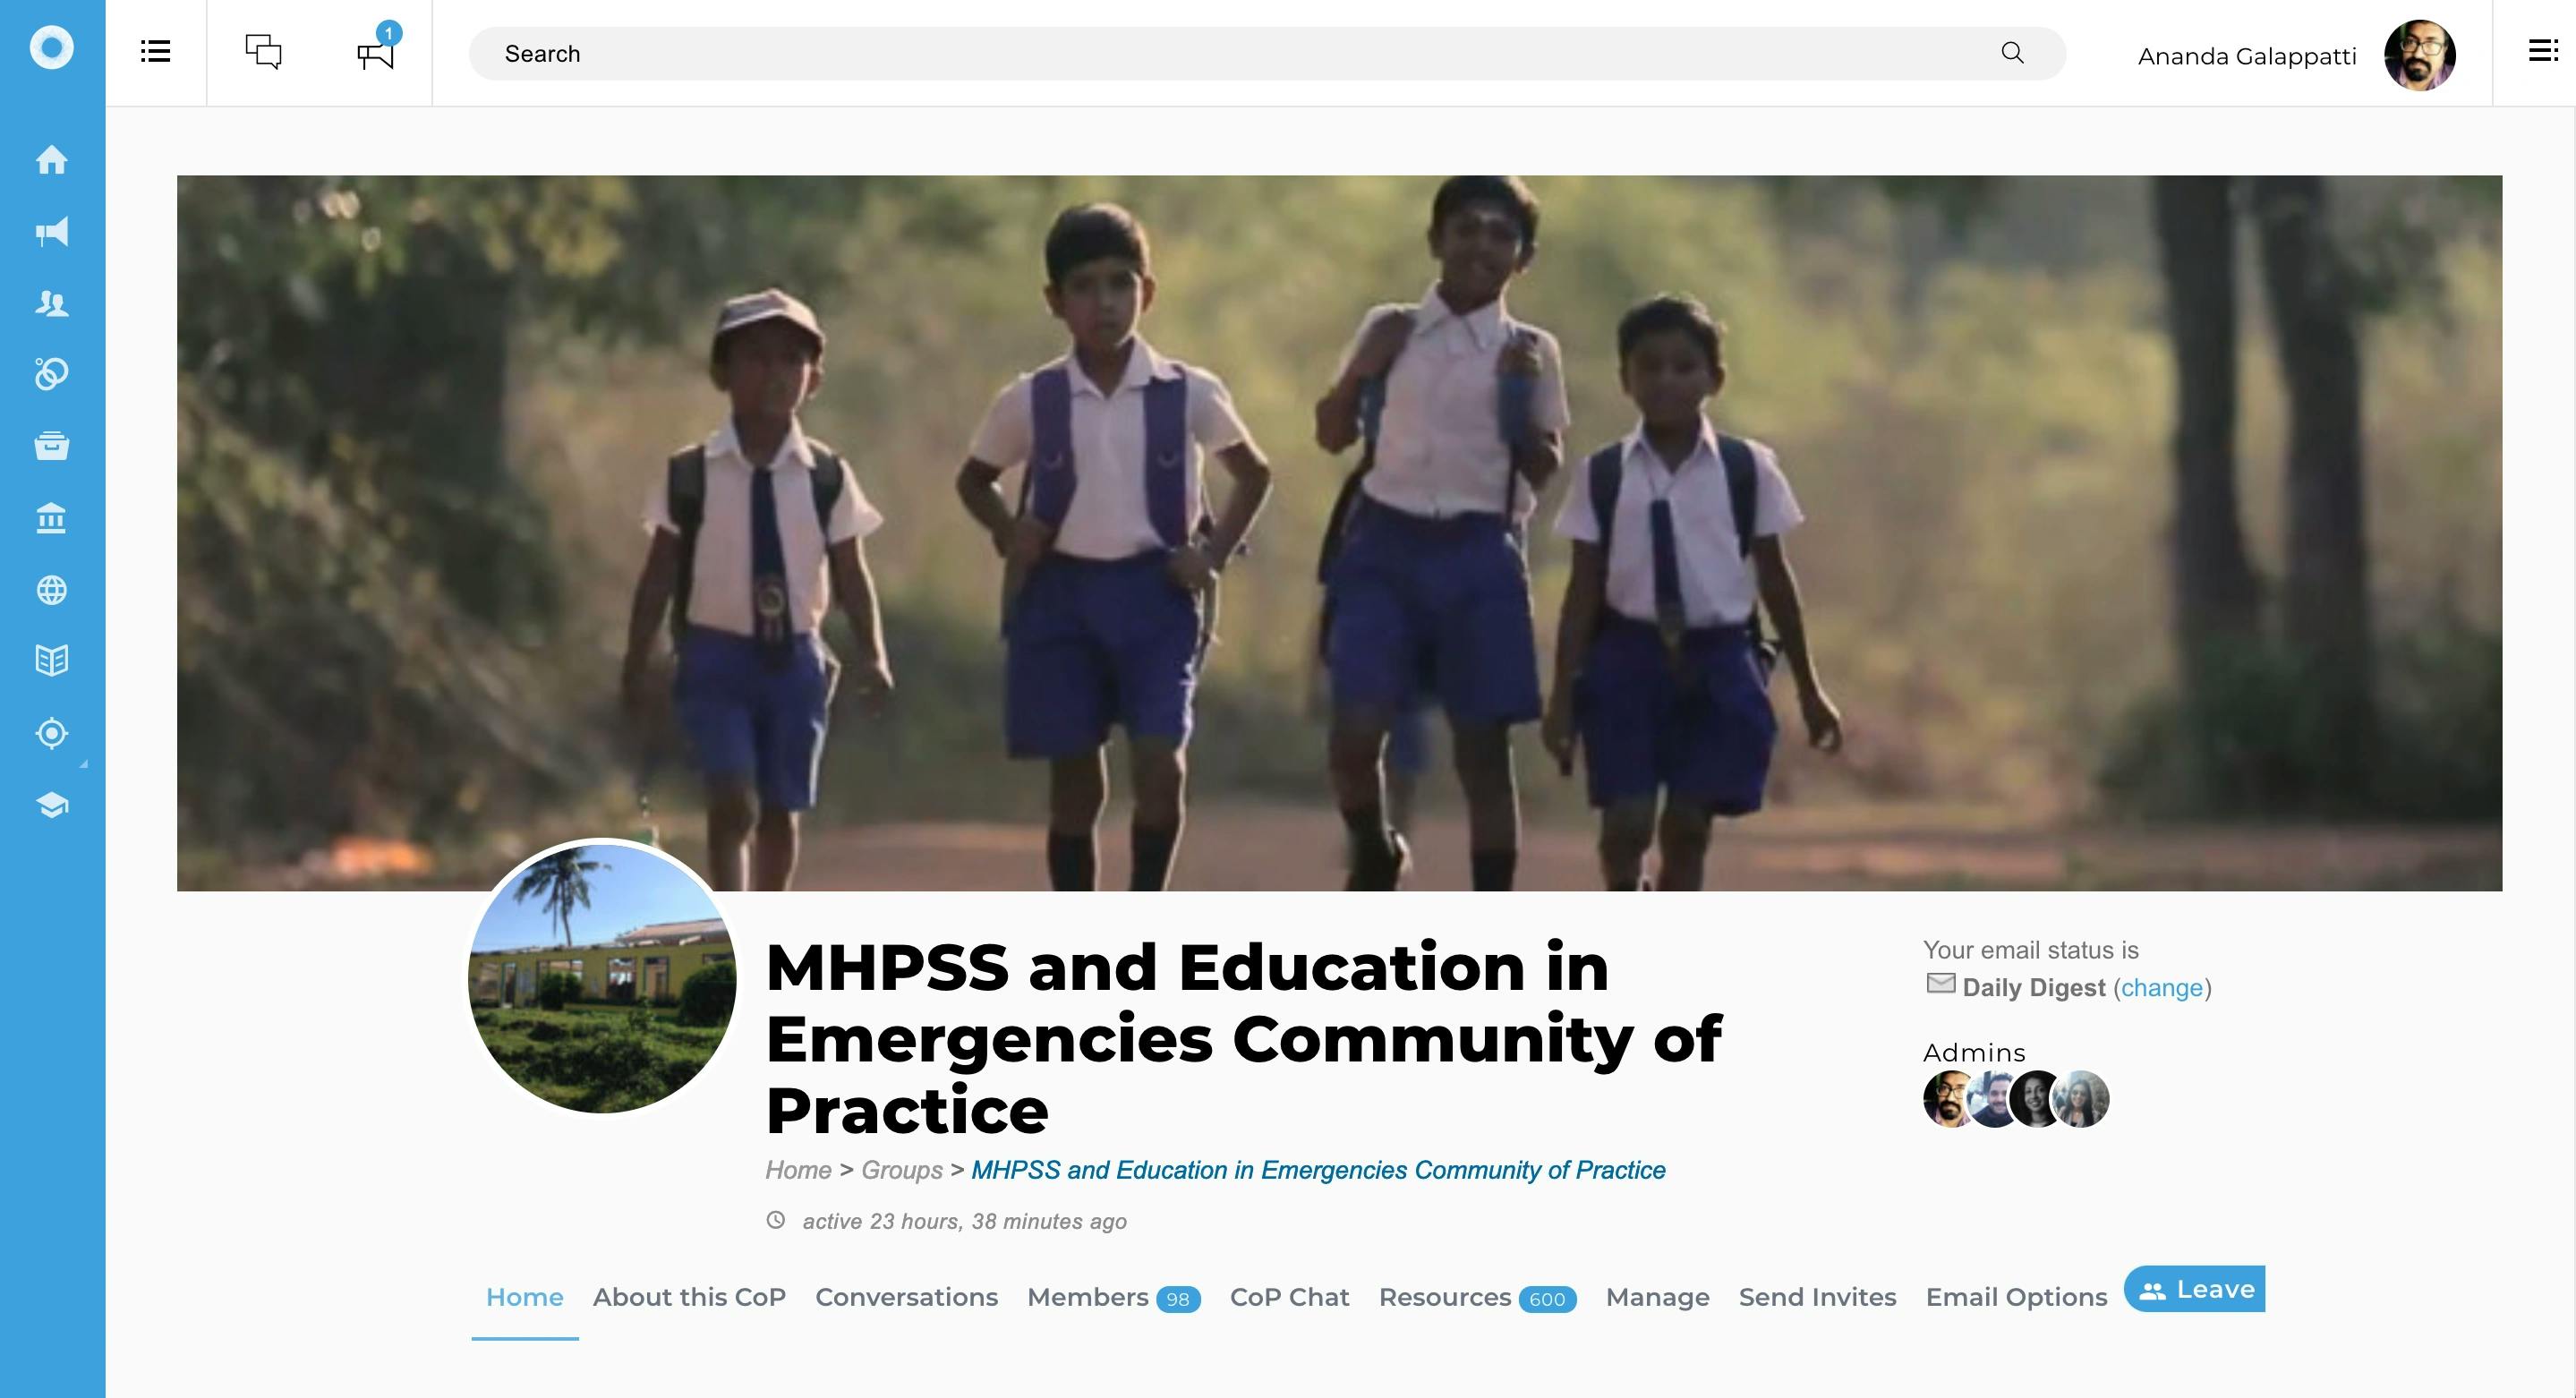 MHPSS and Education in Emergencies Community of Practice